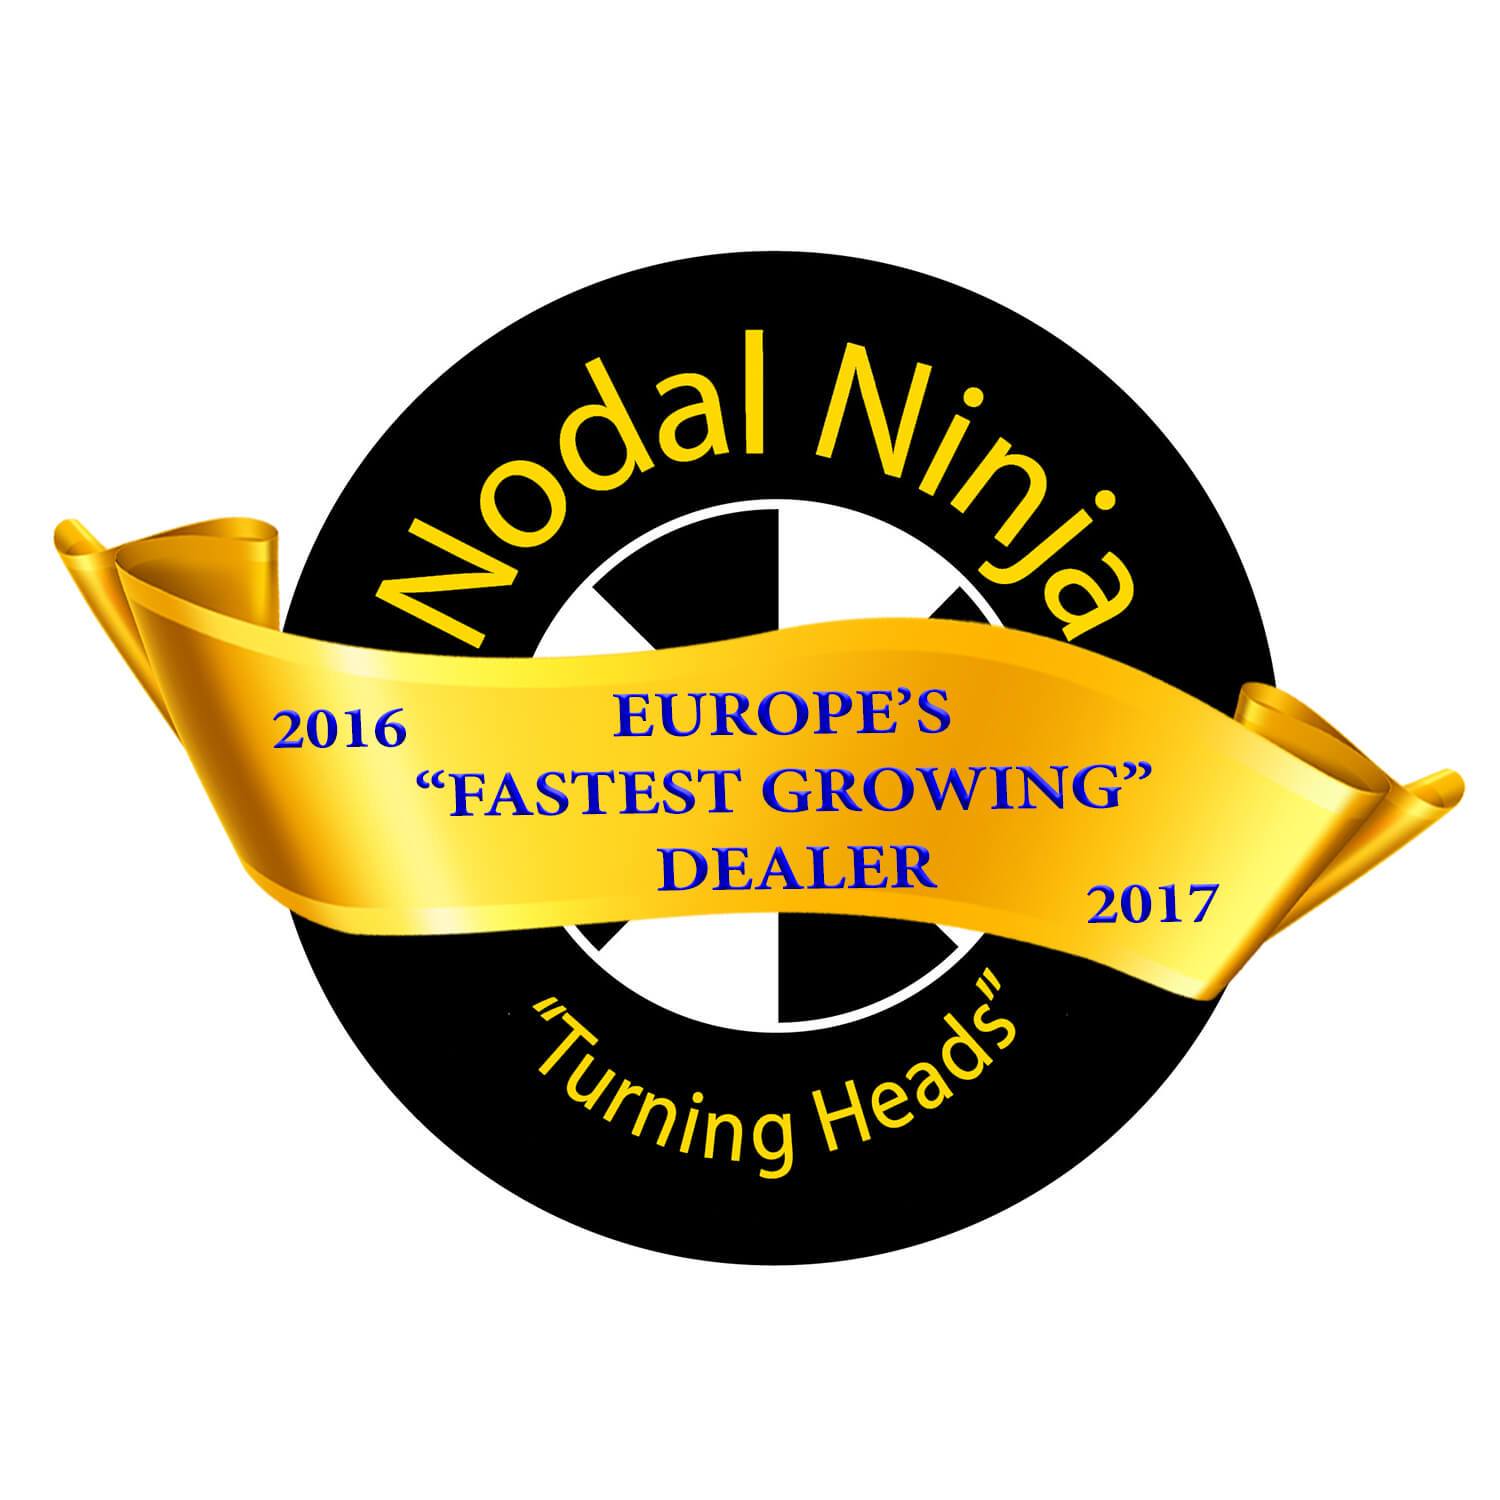 We have been recognized as the fastest growing Nodal Ninja dealer in Europe